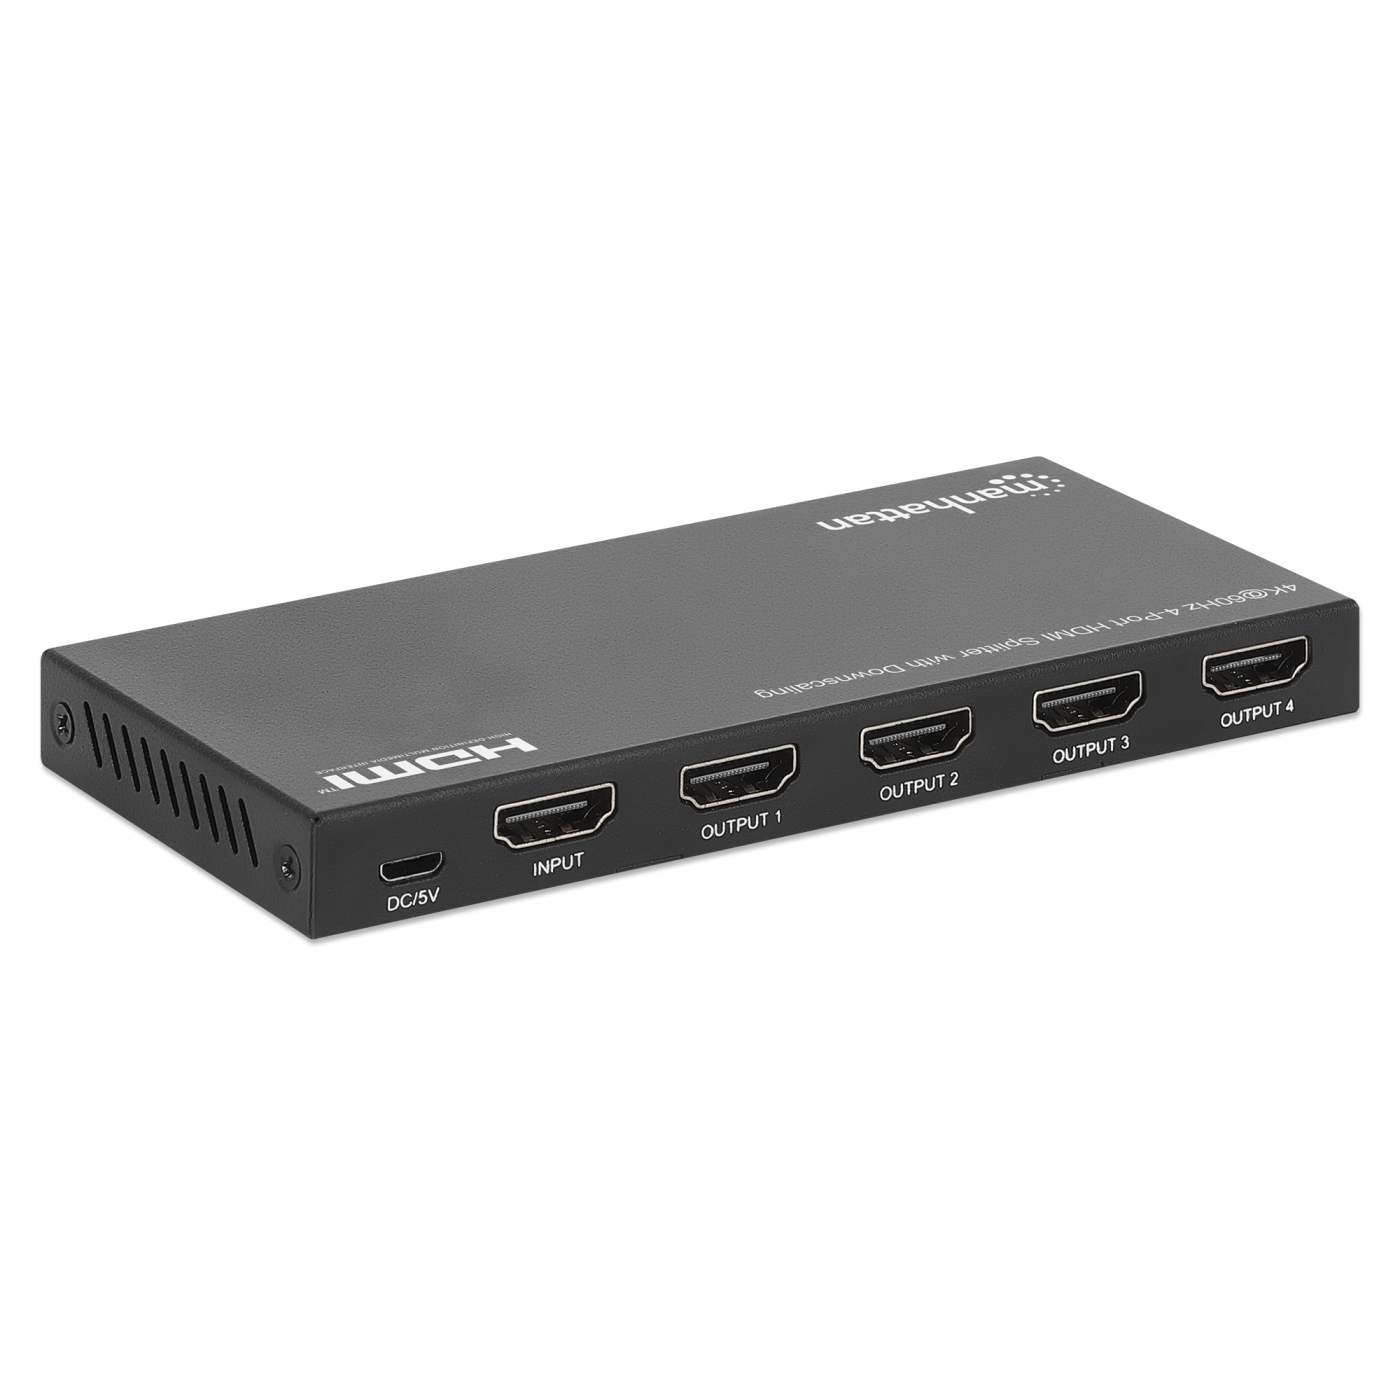 4K@60Hz 4-Port HDMI Splitter with Downscaling Image 5